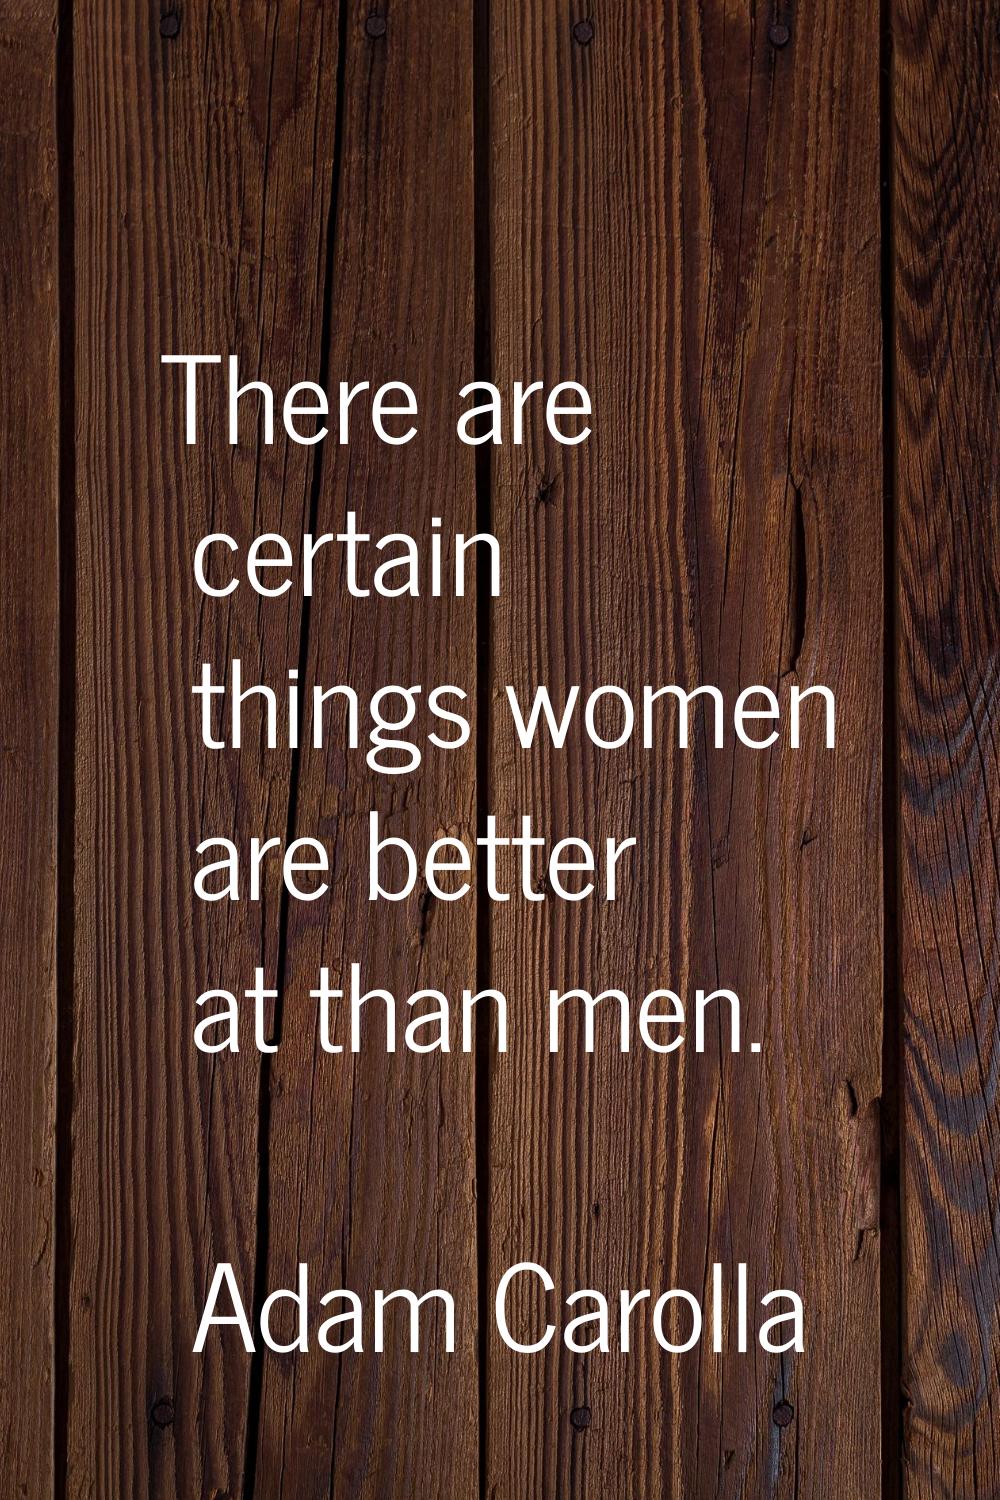 There are certain things women are better at than men.